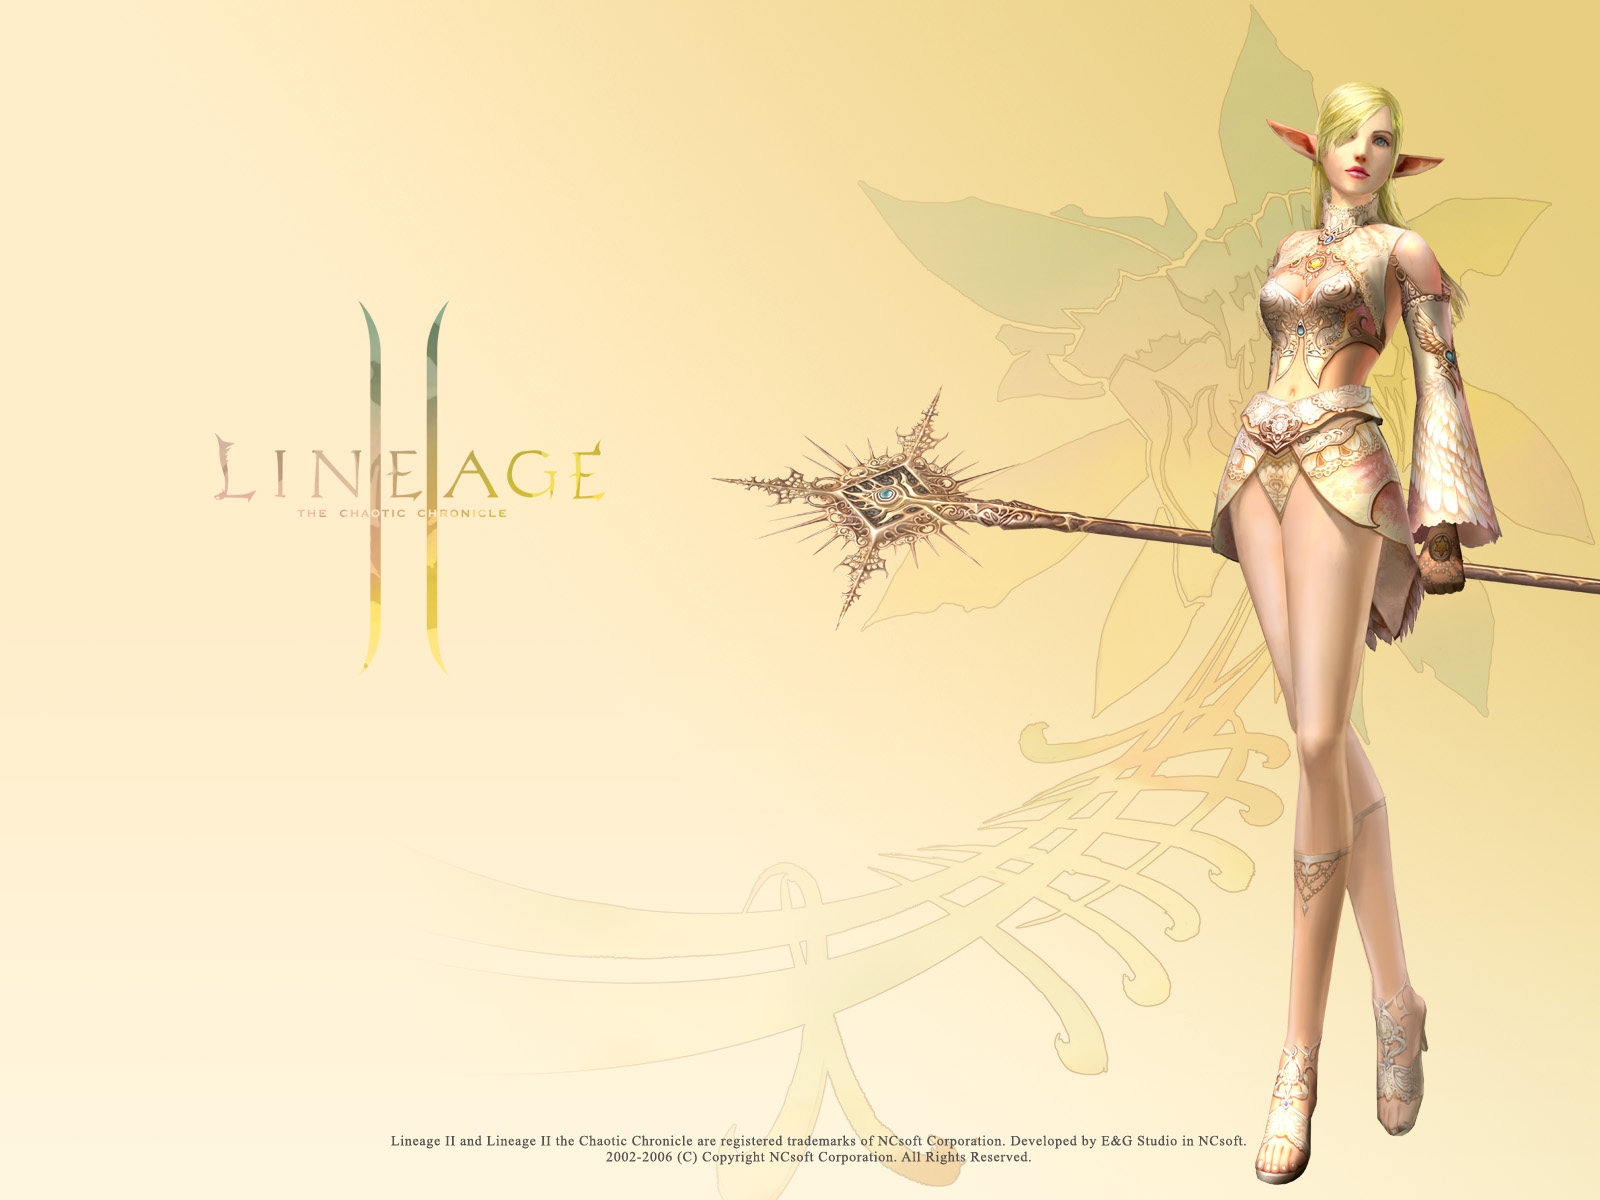 Download High quality Lineage 2 The Chaotic Throne wallpaper / Games / 1600x1200